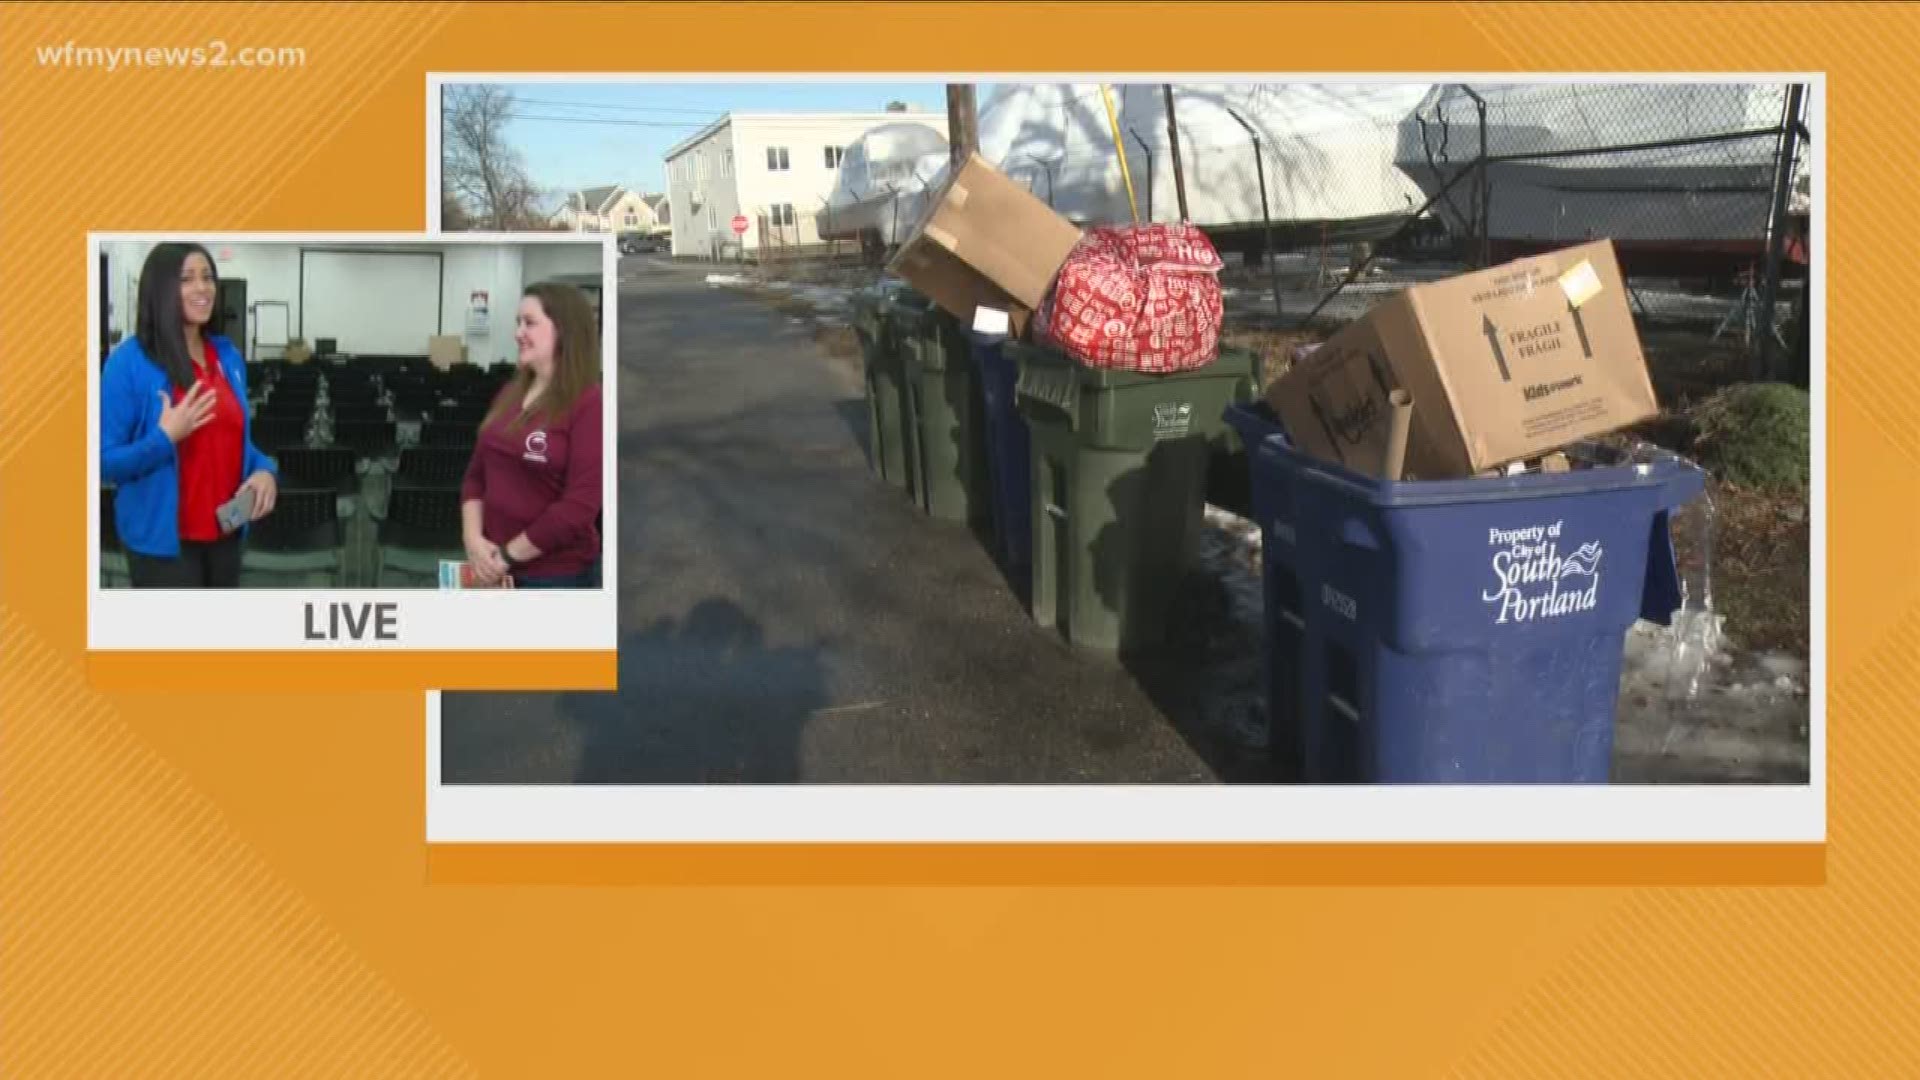 According to the U.S. Environmental Protection Agency, Americans throw away 25-percent more trash during the holiday season.